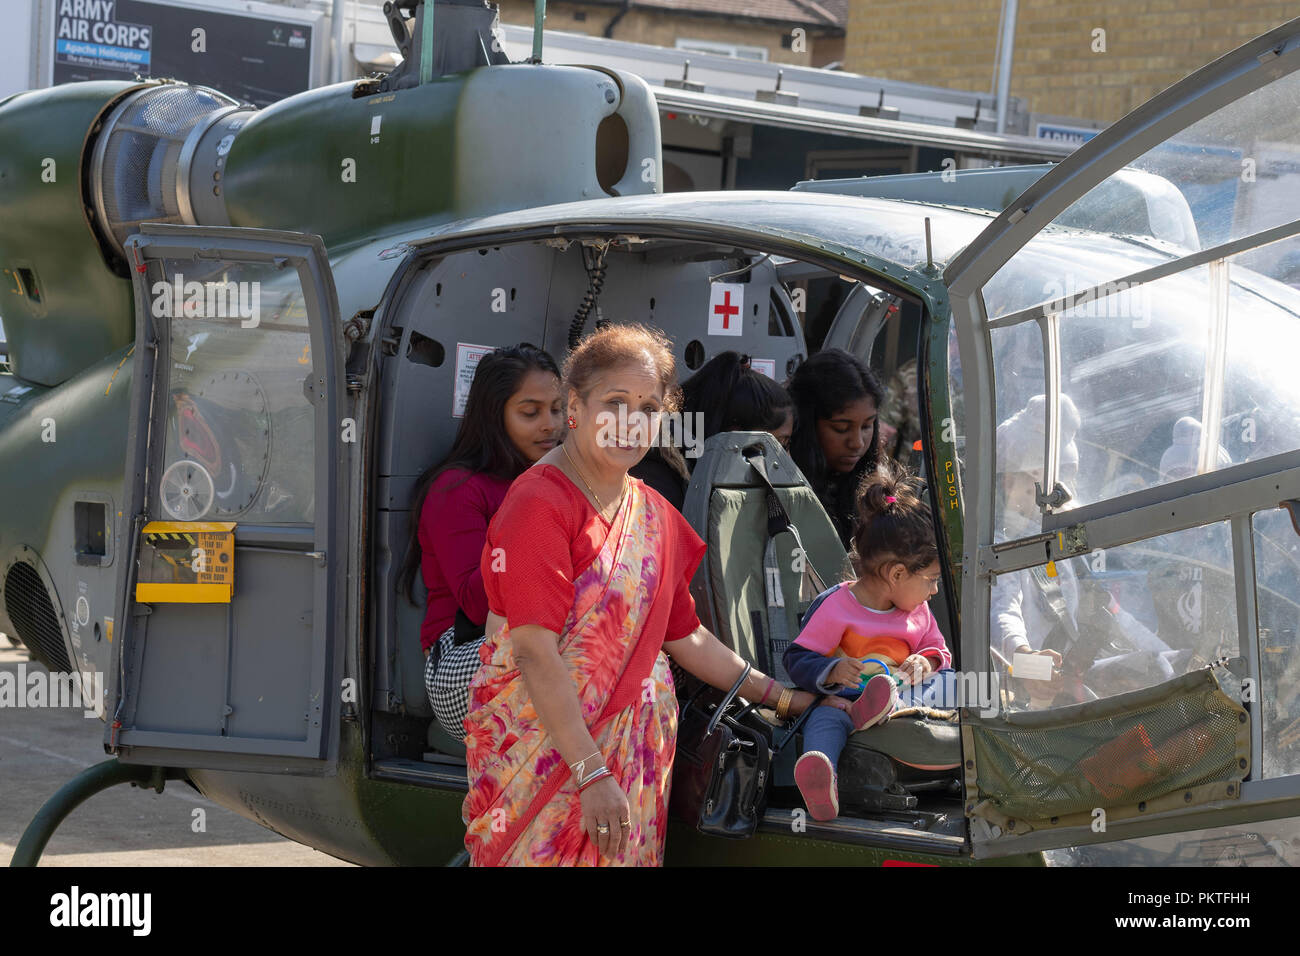 London 15th September 2018 UK Army open day to mark annual Saragarhi Commemorations This celebrates an epic battle where 21 Sikh soldiers took a last stand against 10,000 enemy tribesmen in 1897  A sikh family with an army air corp helicopter Credit Ian Davidson/Alamy Live News Stock Photo